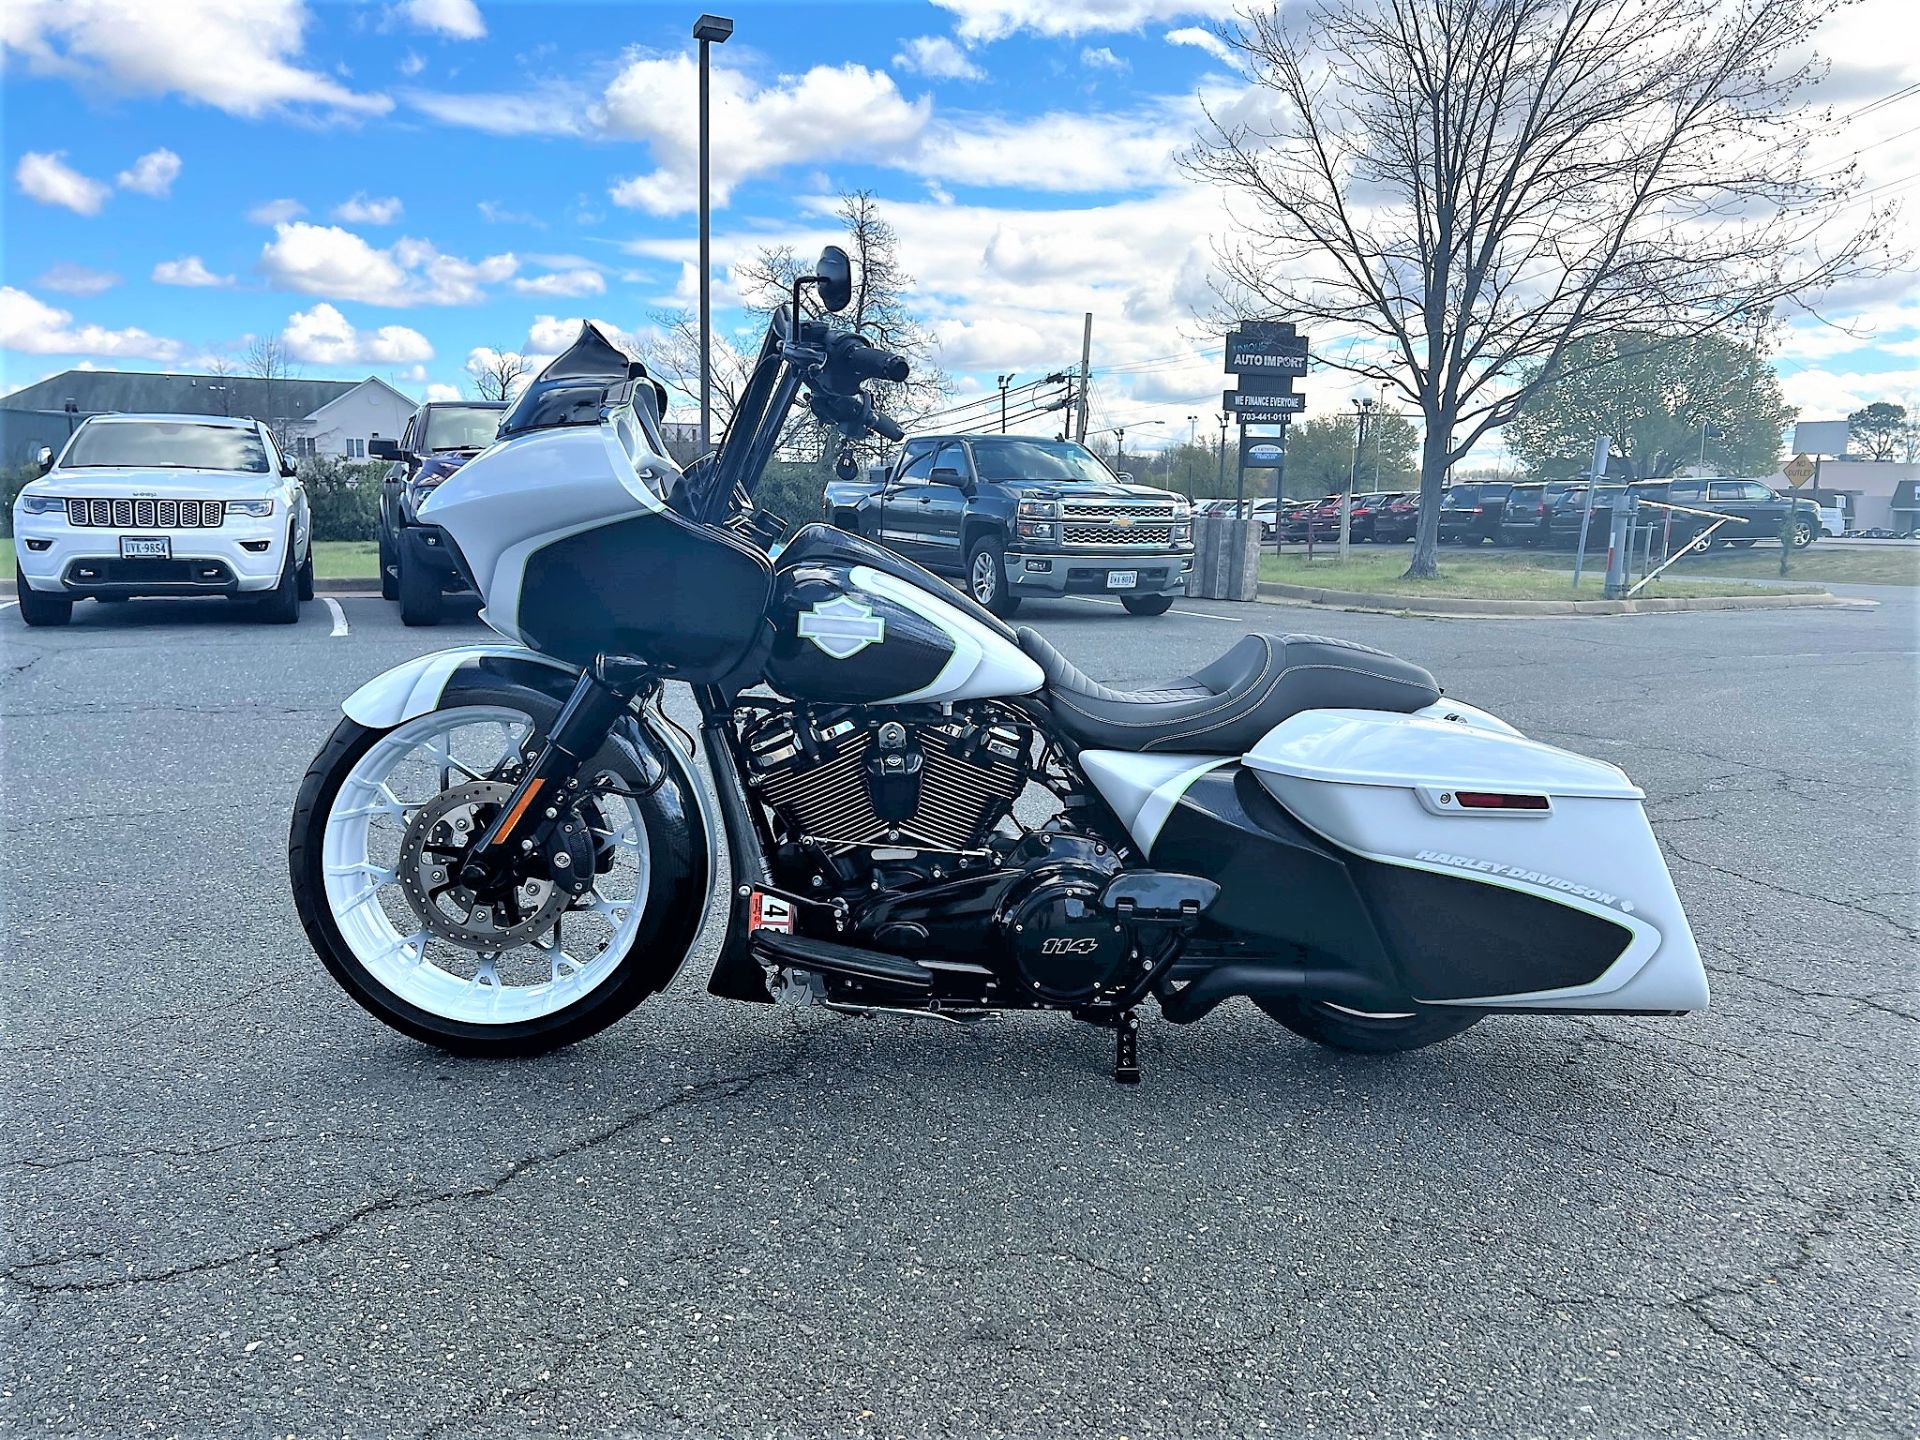 2020 Harley-Davidson Road Glide Special in Dumfries, Virginia - Photo 11